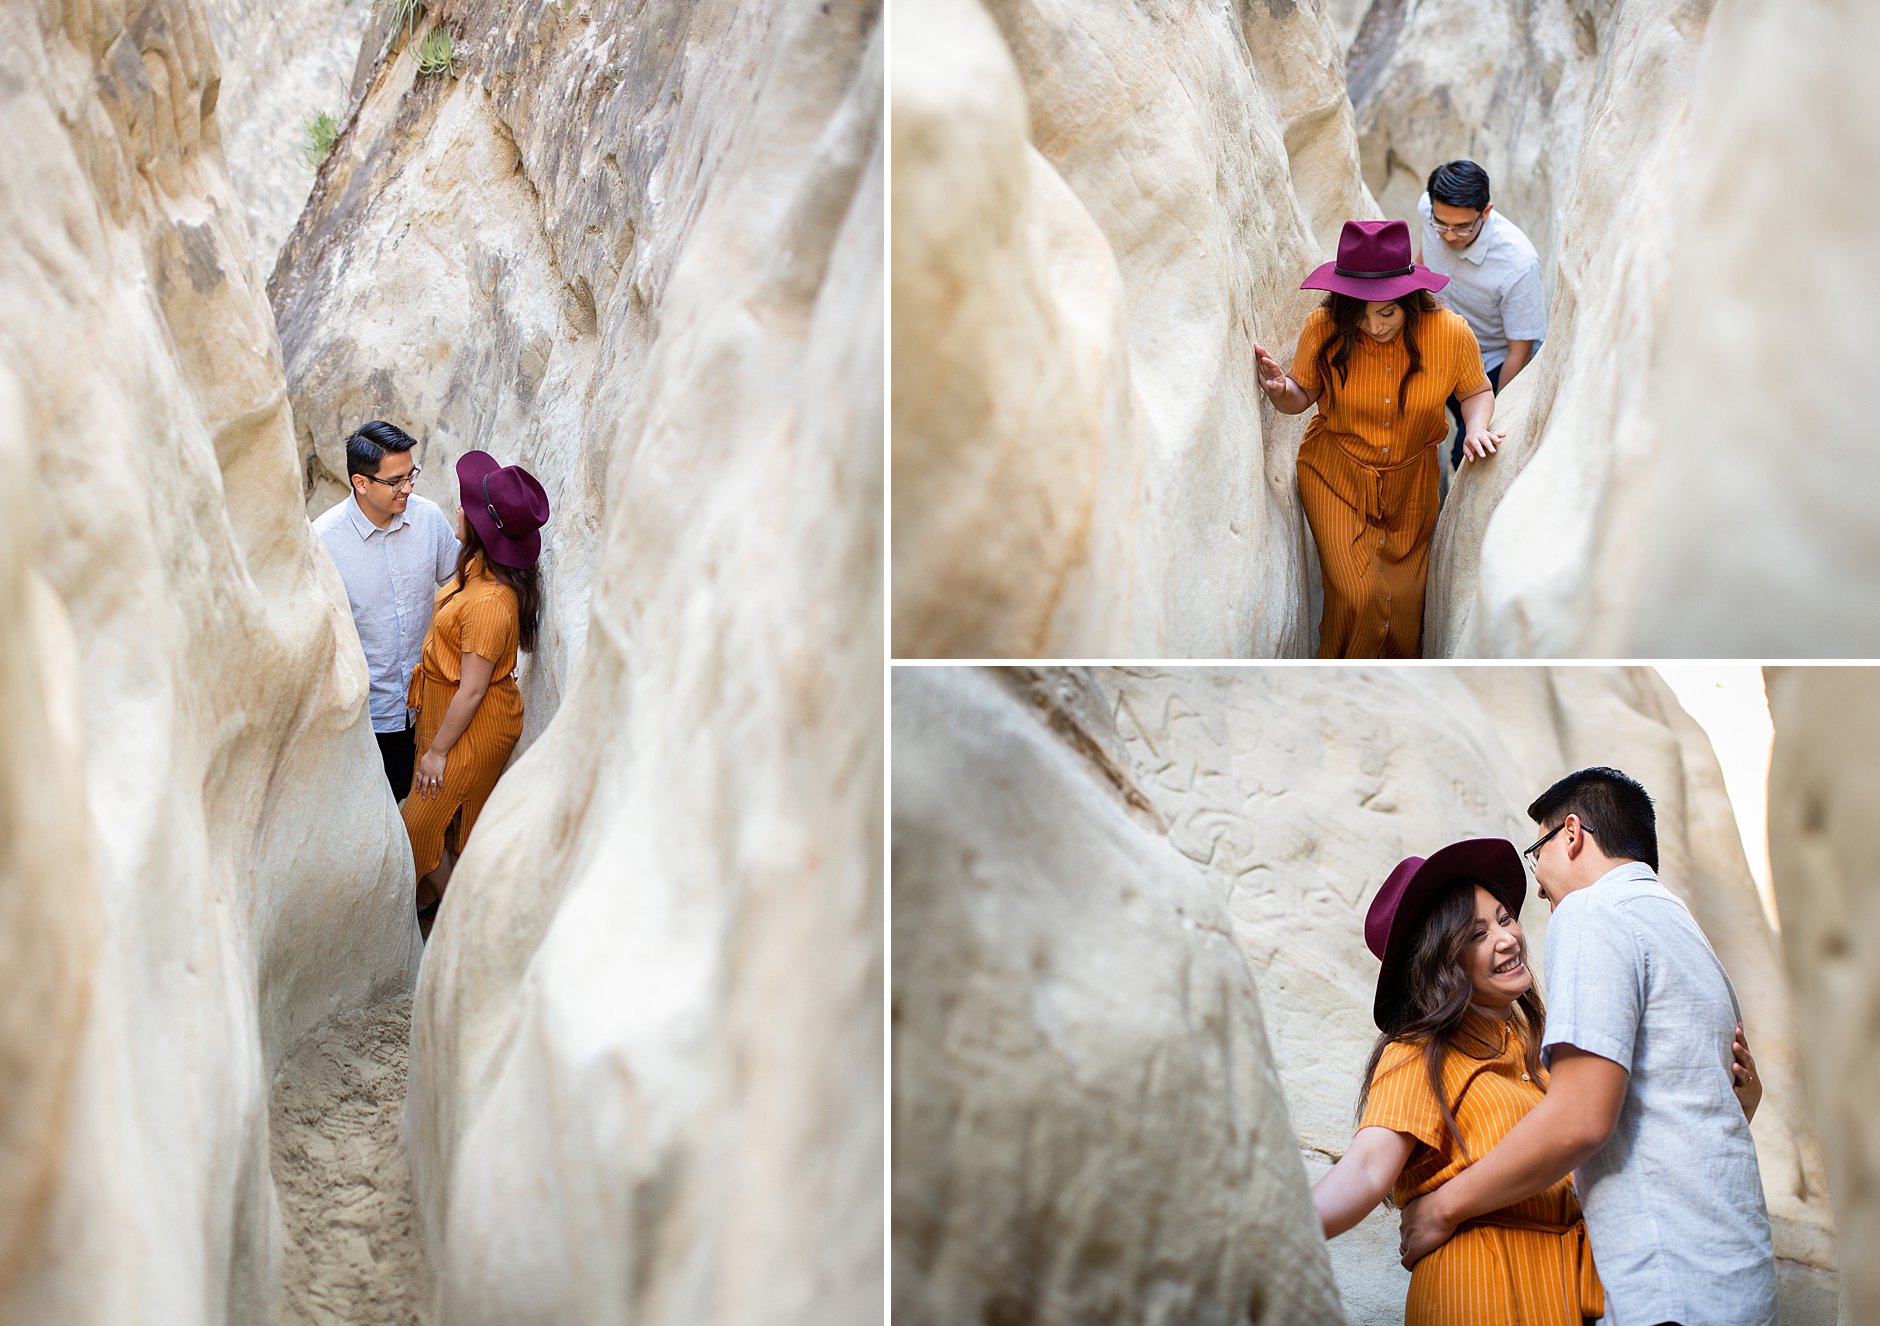 engagement session in Annie's Canyon Trails. Romantic and gorgeous.